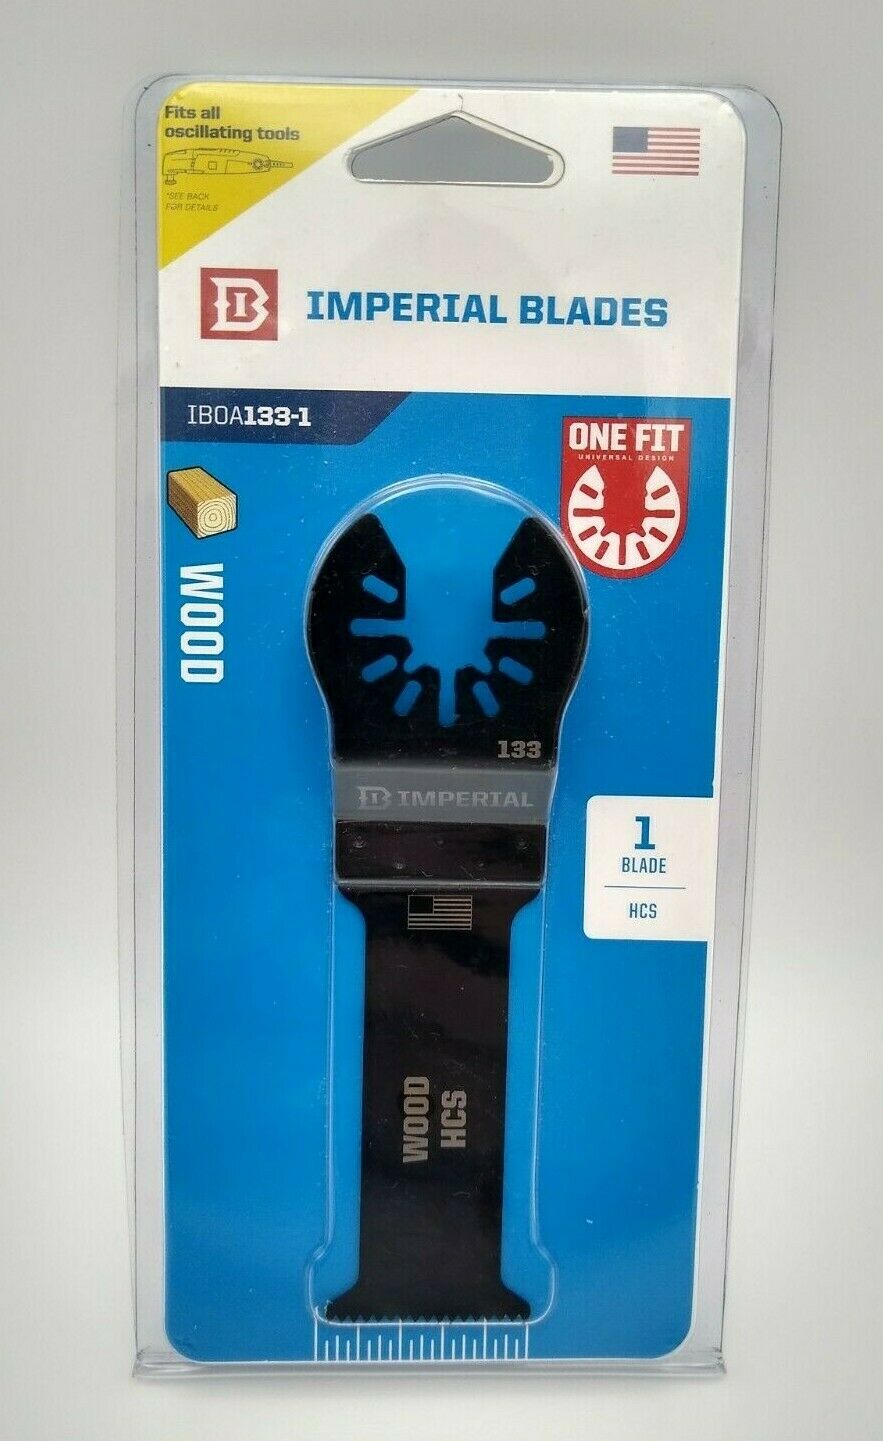 Imperial Blades Iboa133-1 One Fit 1-1/4" Deep Wood Hcs 1 Blade Free Shipping